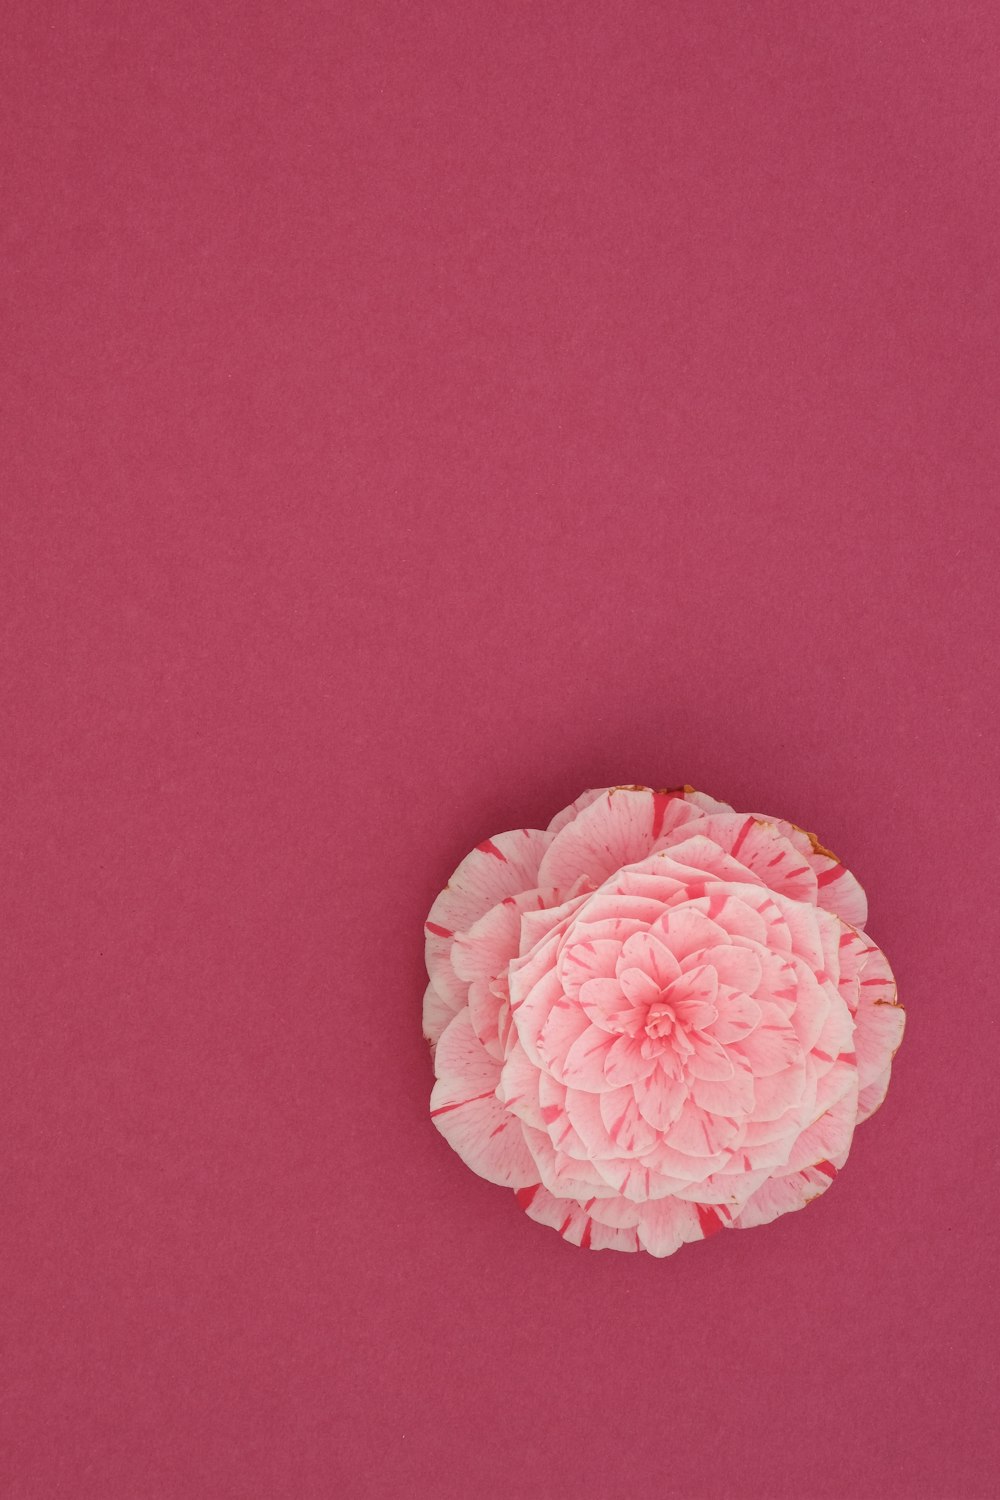 pink flower on pink surface